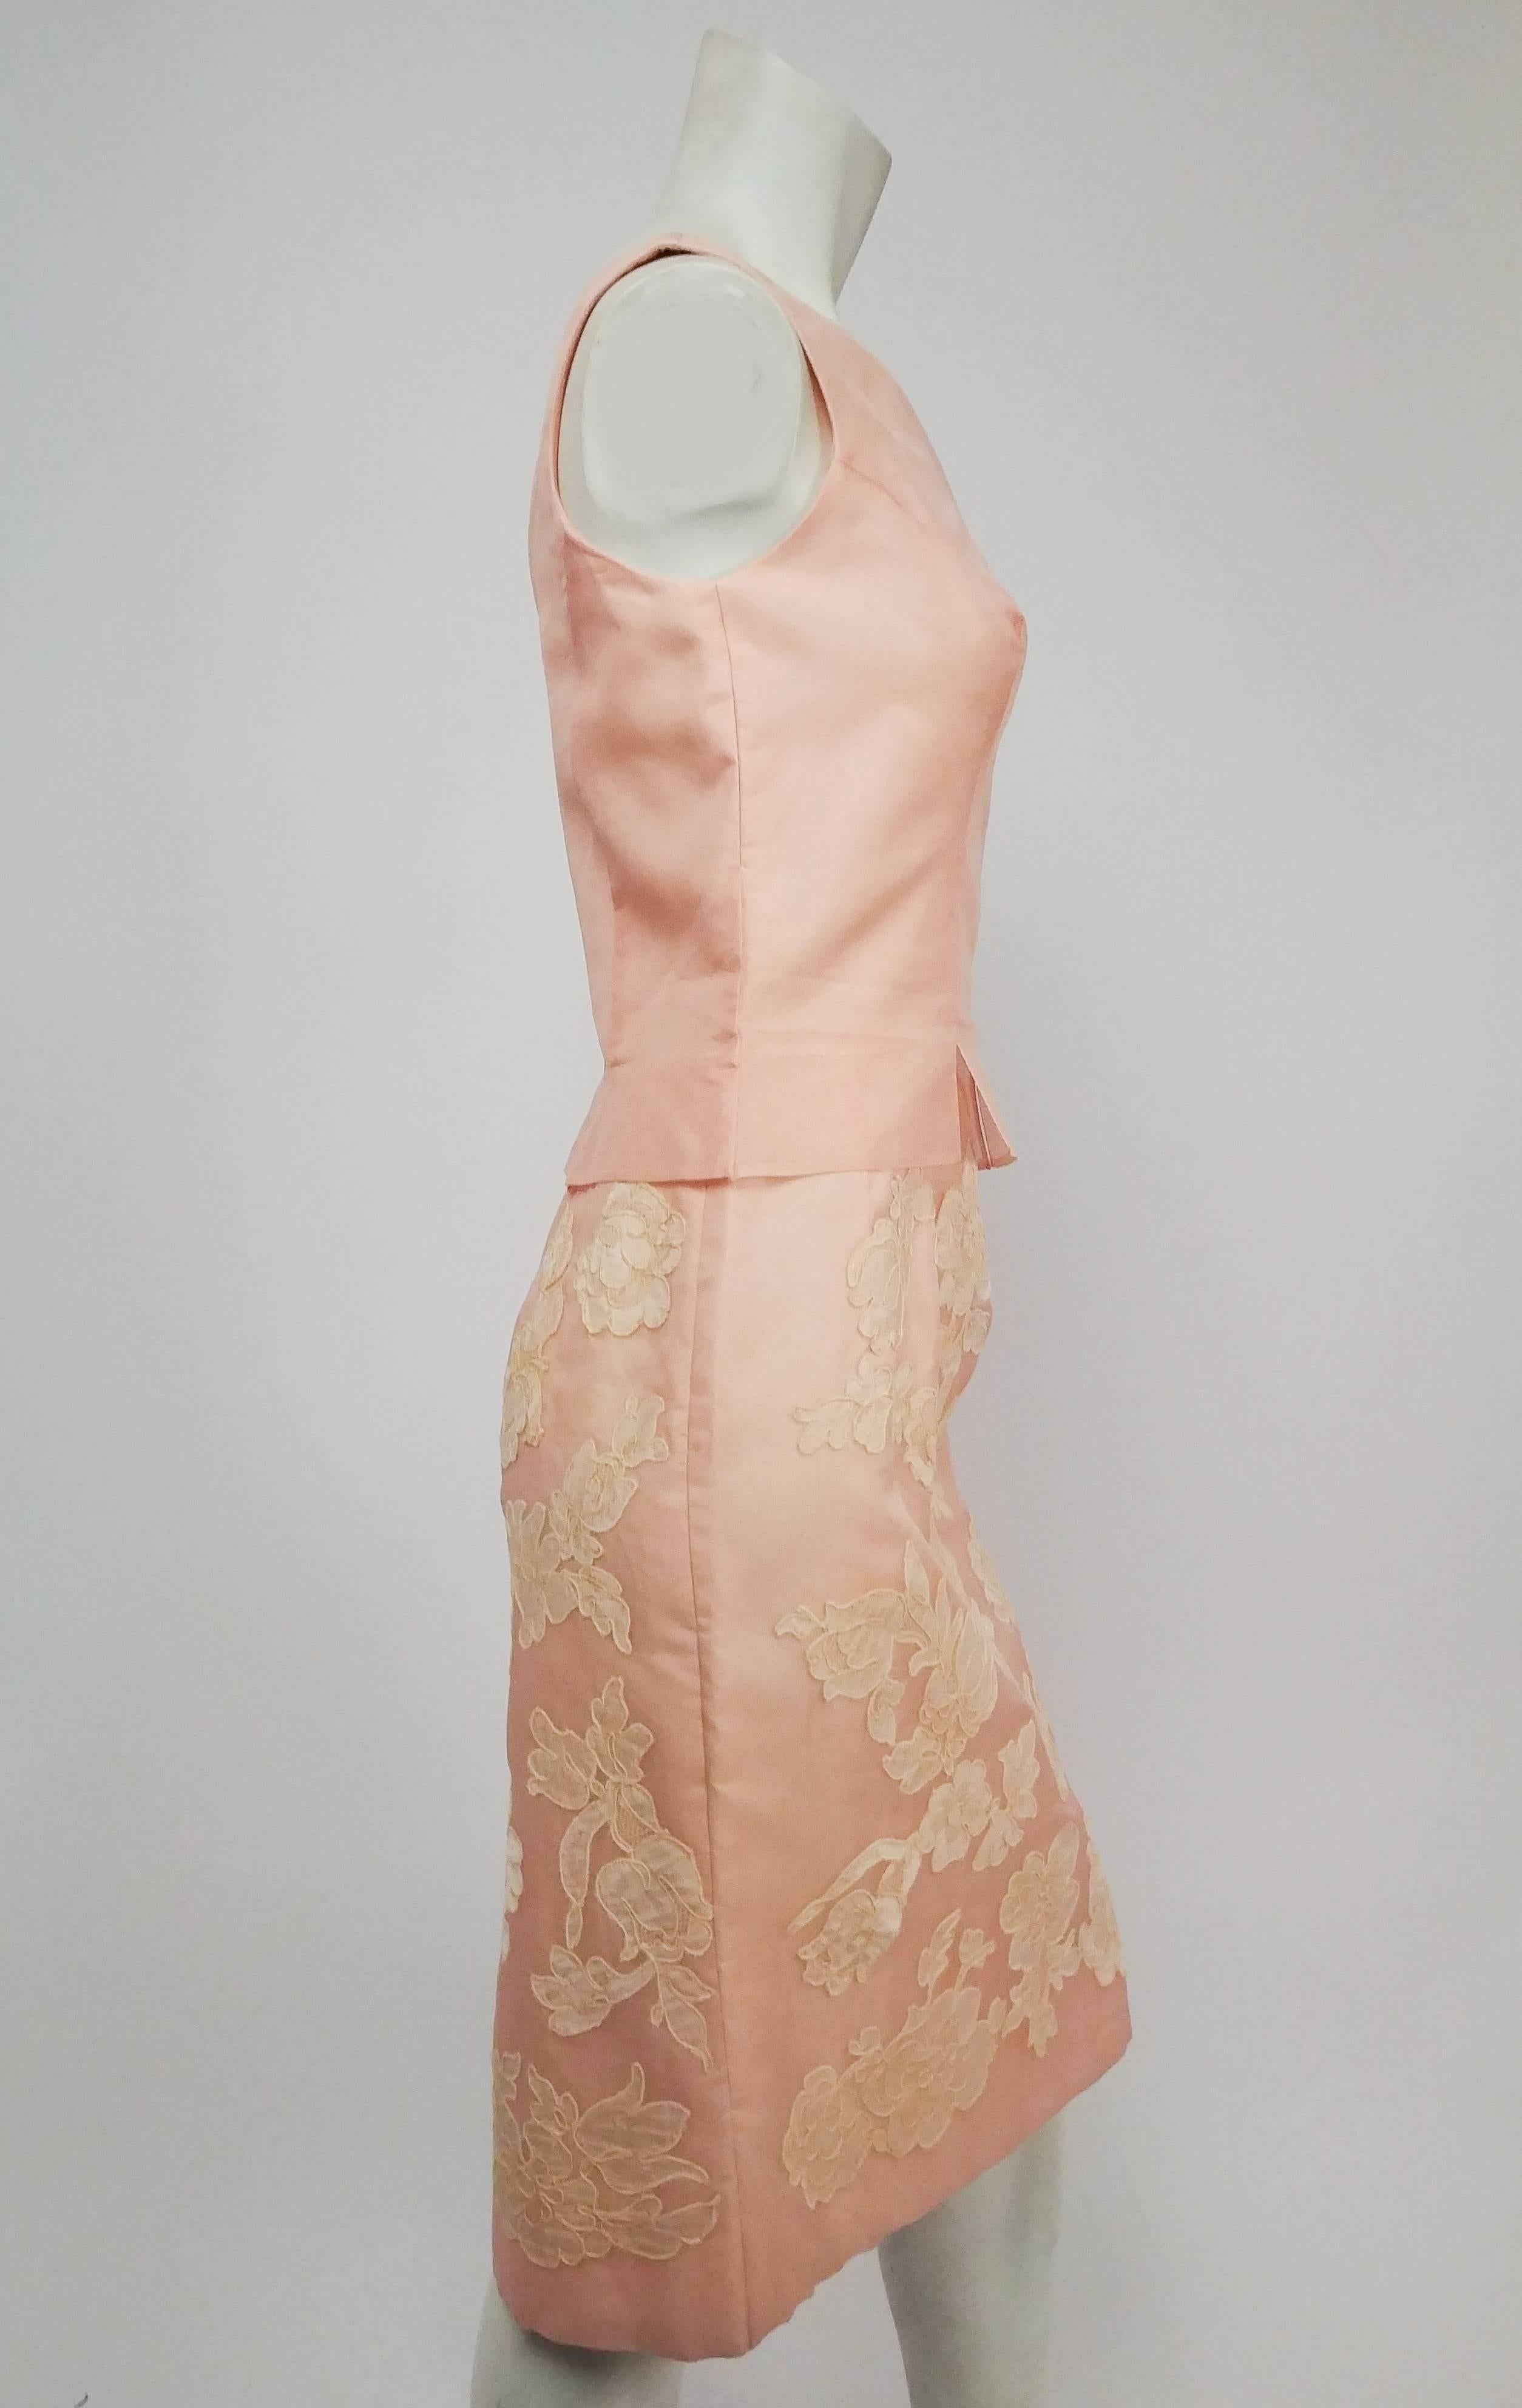 Petal Pink Organza Cocktail Dress w/ Lace Appliqué, 1960s. Romantic pink silk organza sheath dress with wide boat-neck collar and flattering princess seams at bodice. Skirt is embellished with white lace appliqué and ends at knee. Zips up side. 